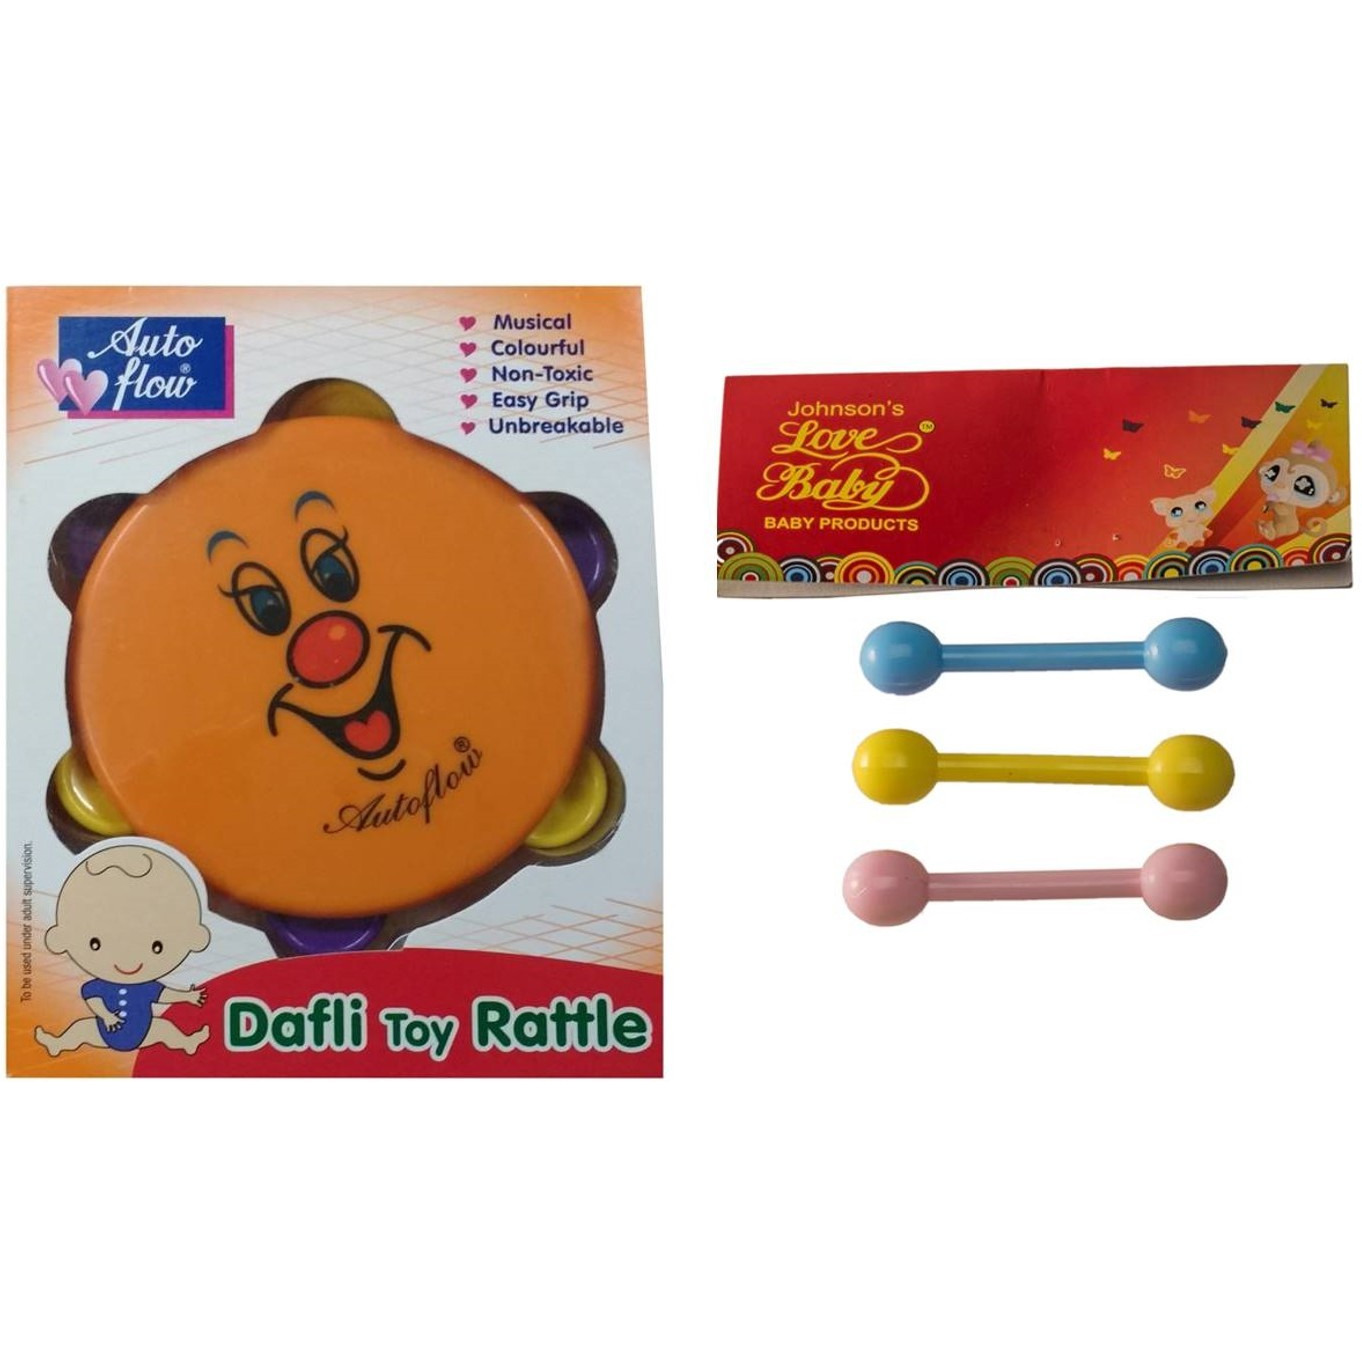 Auto Flow Rattle Toy - Dafli Toy - BT26 Combo Peach